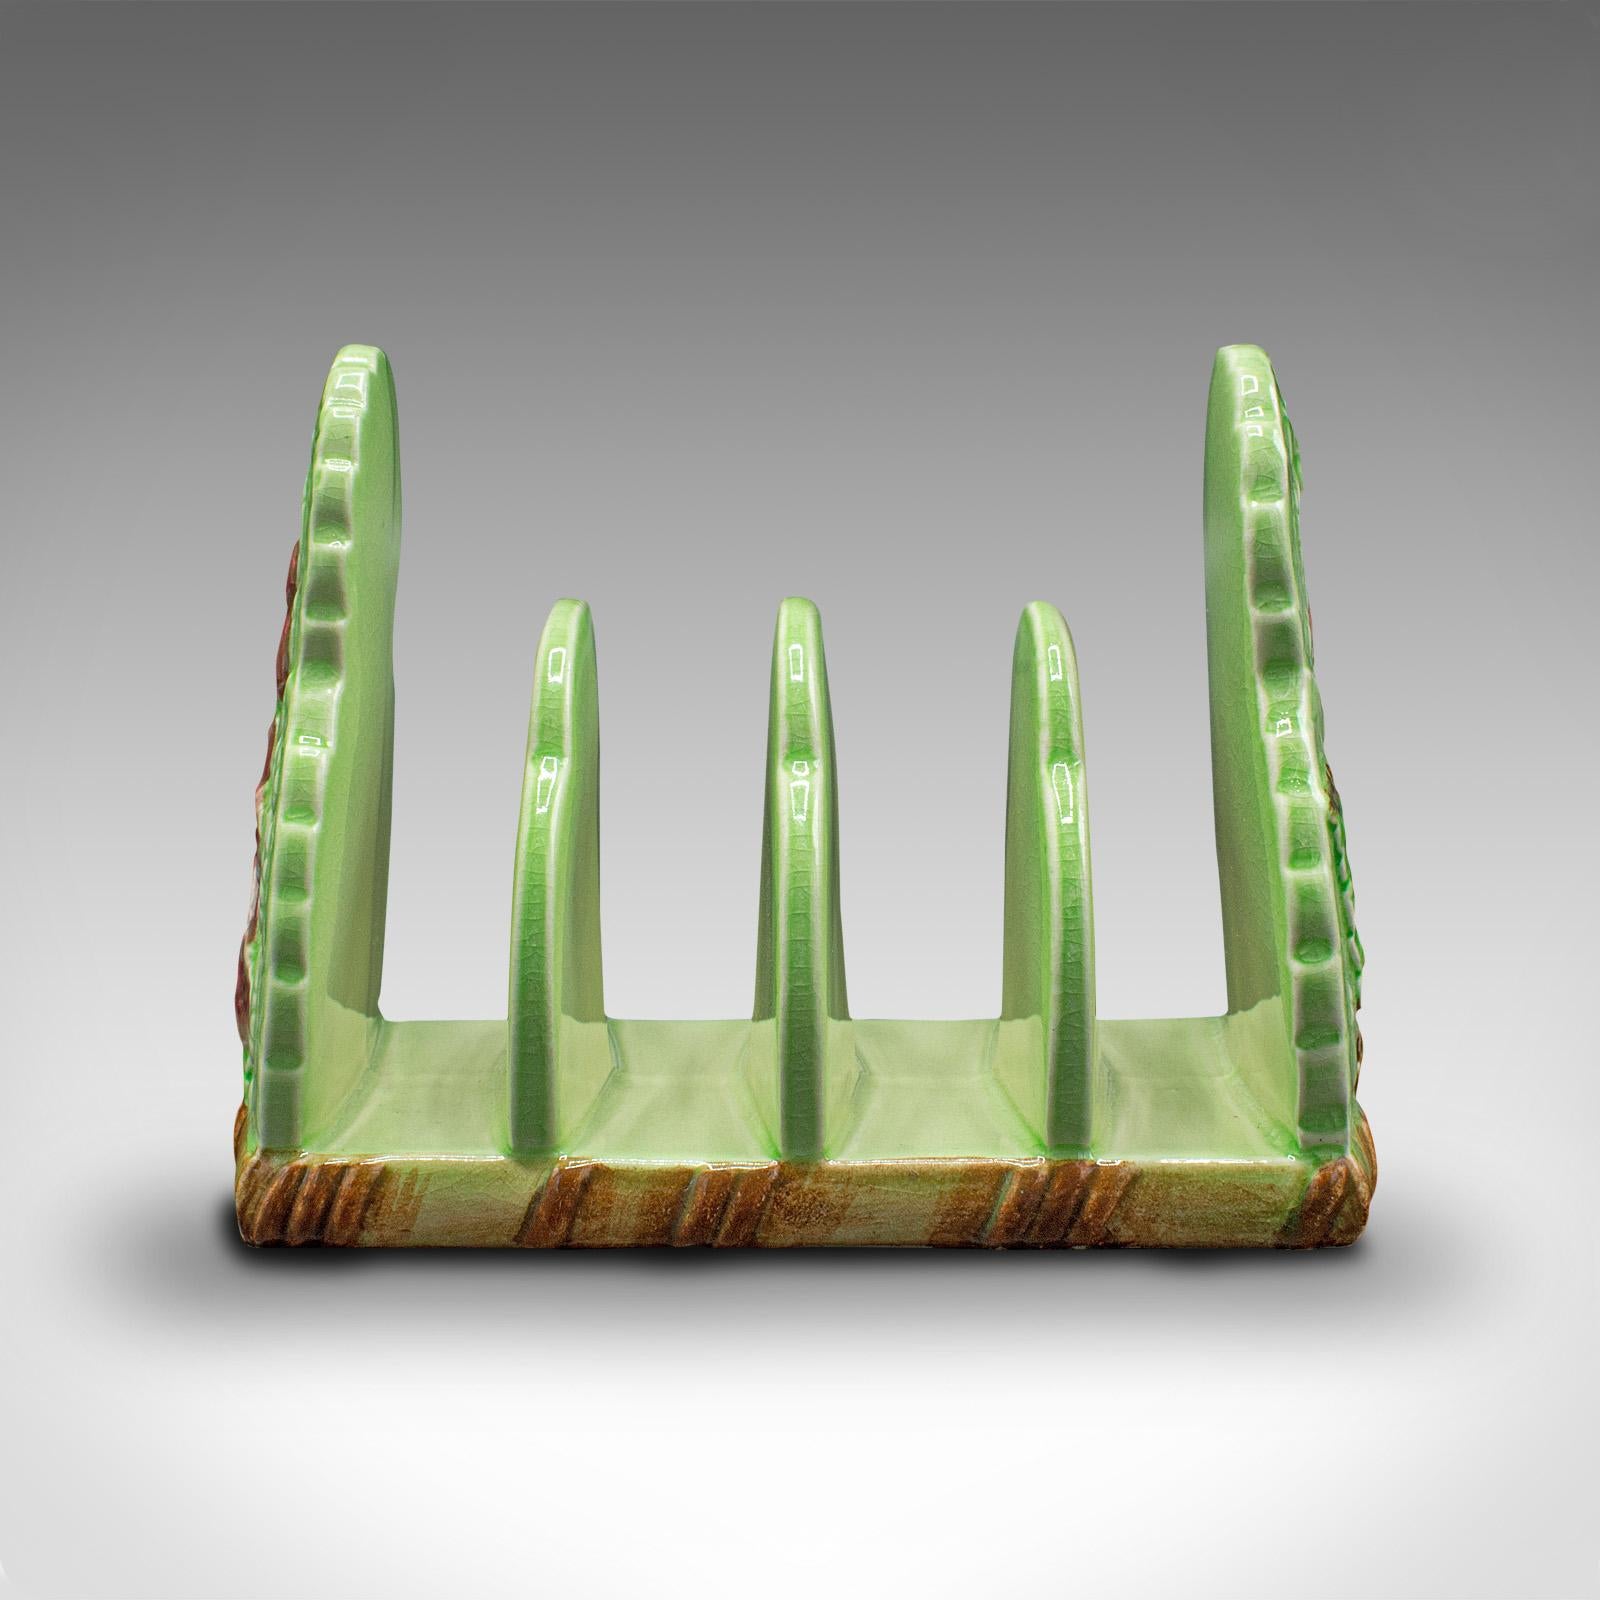 This is a vintage decorative breakfast stand. An English, ceramic 4-slot toast rack, dating to the mid 20th century, circa 1940.

Grace the breakfast table with a splash of charming colour 
Displaying a desirable aged patina in good original